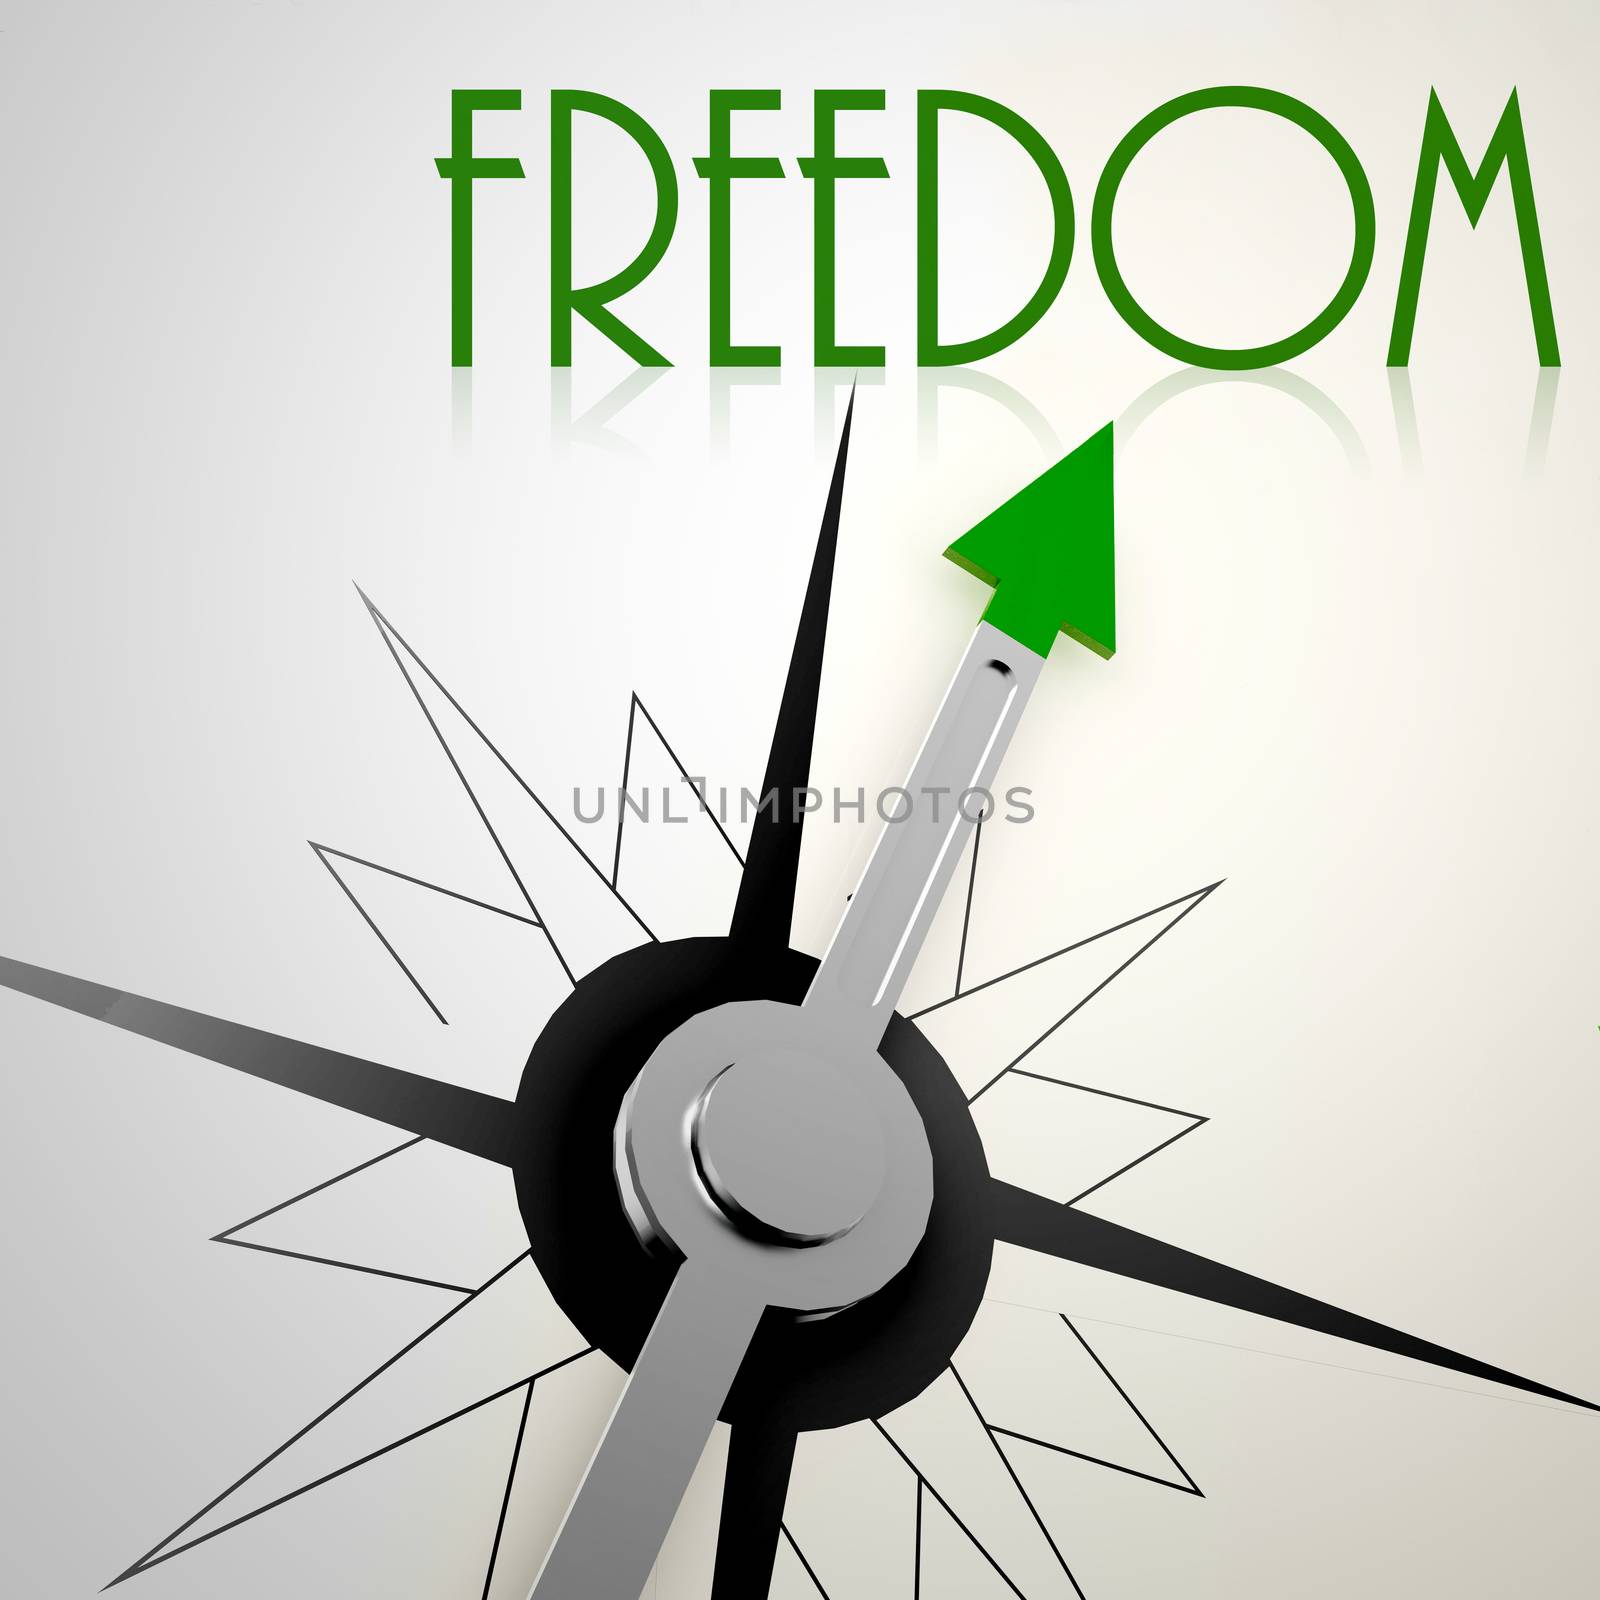 Freedom on green compass by tang90246